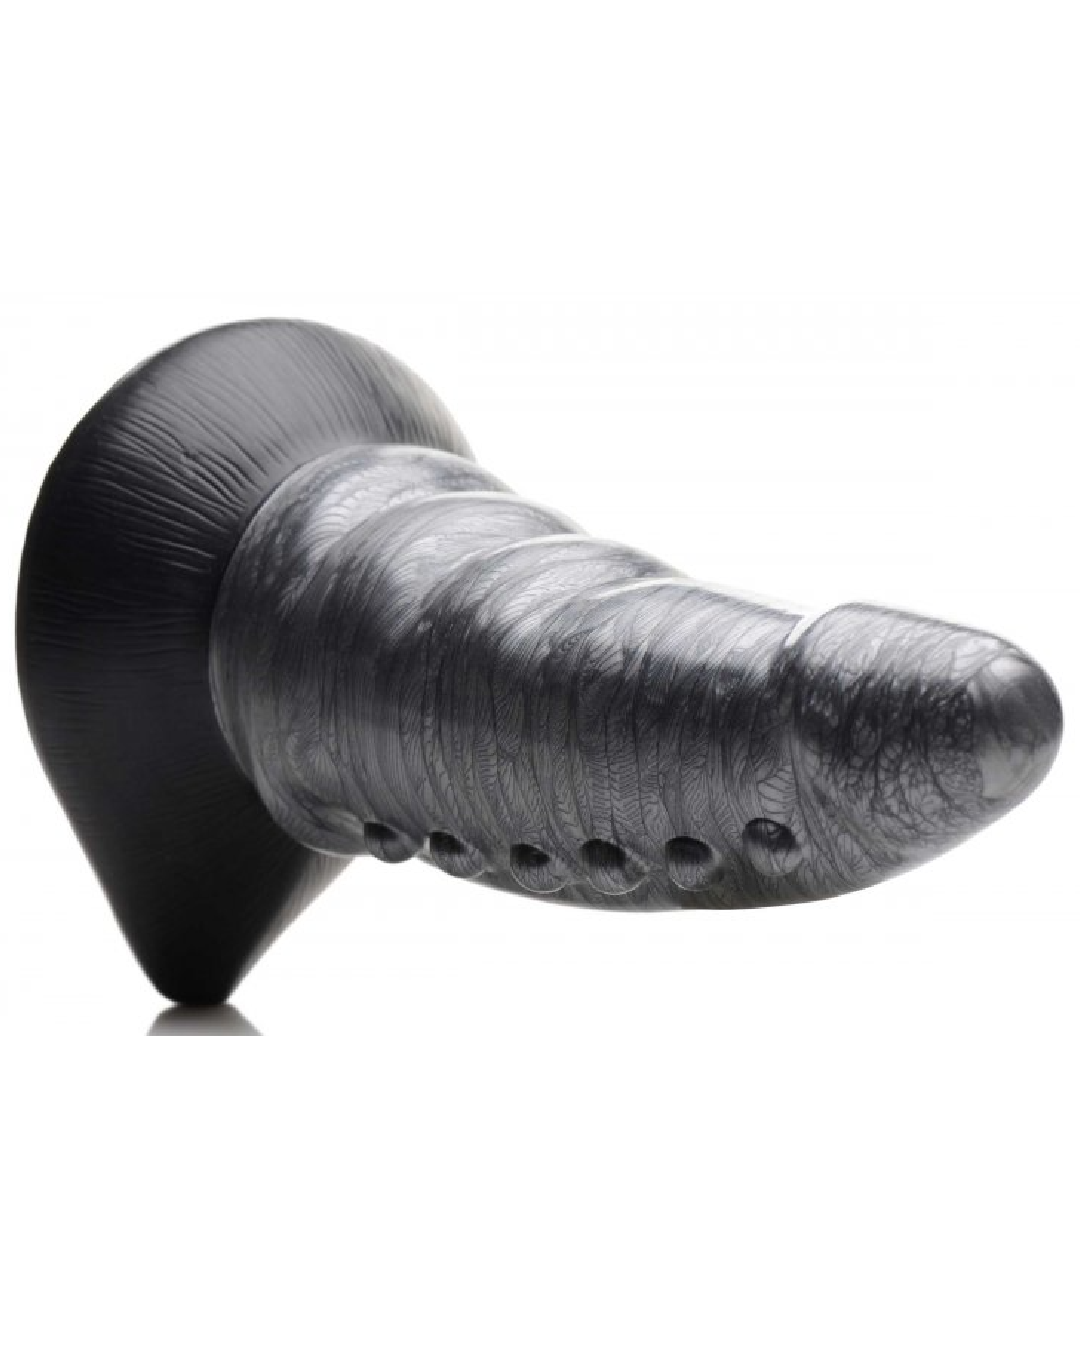 Creature Cocks Beastly Tapered Bumpy Silicone Tentacle Dildo view of tapered tip